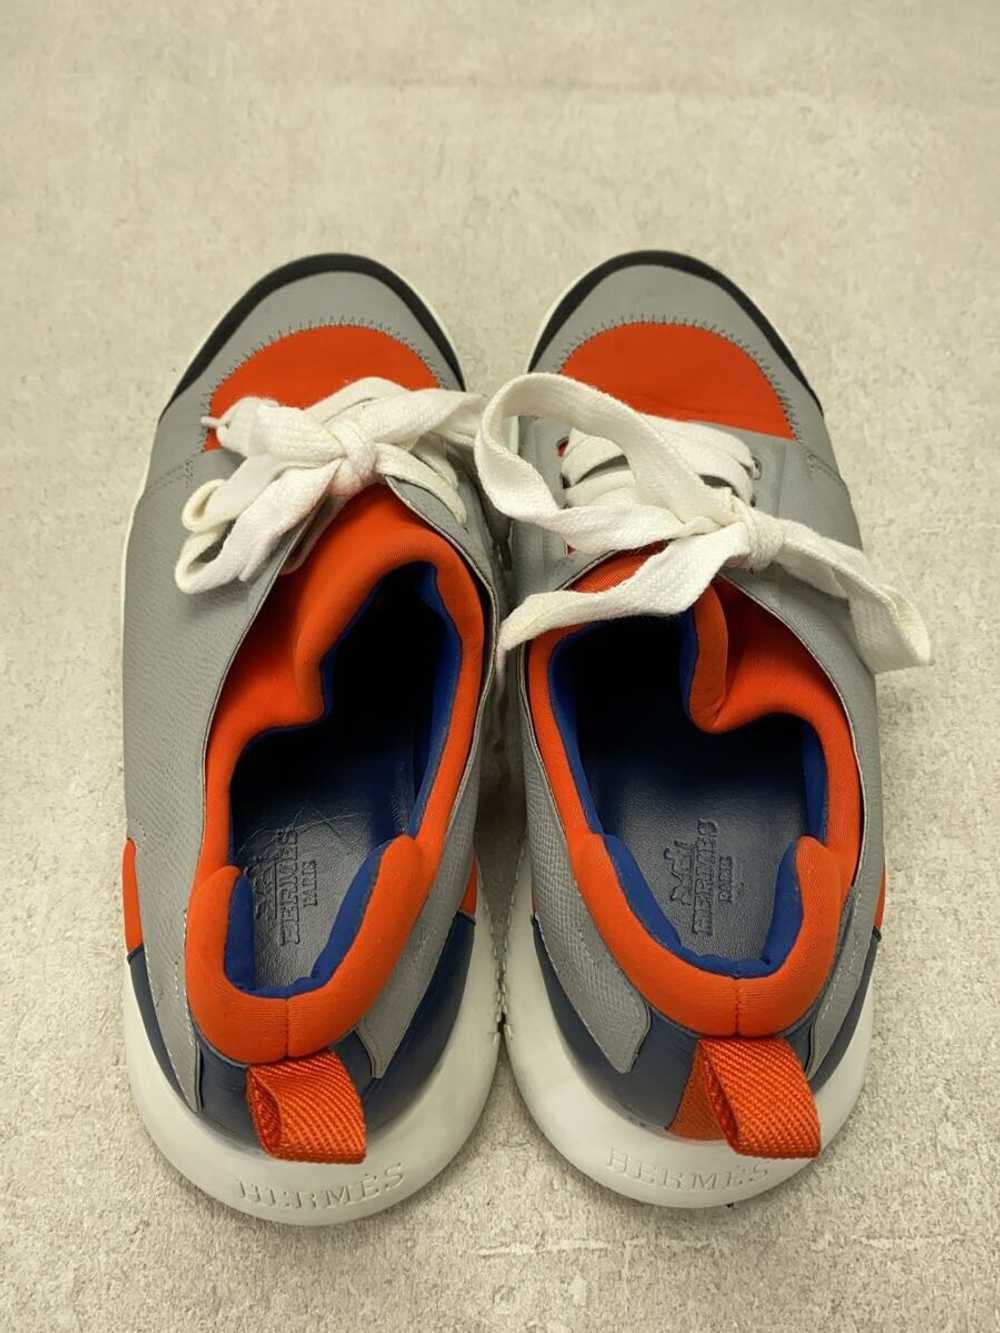 Hermes Low Cut Sneakers/39/Gry Shoes BiV99 - image 3